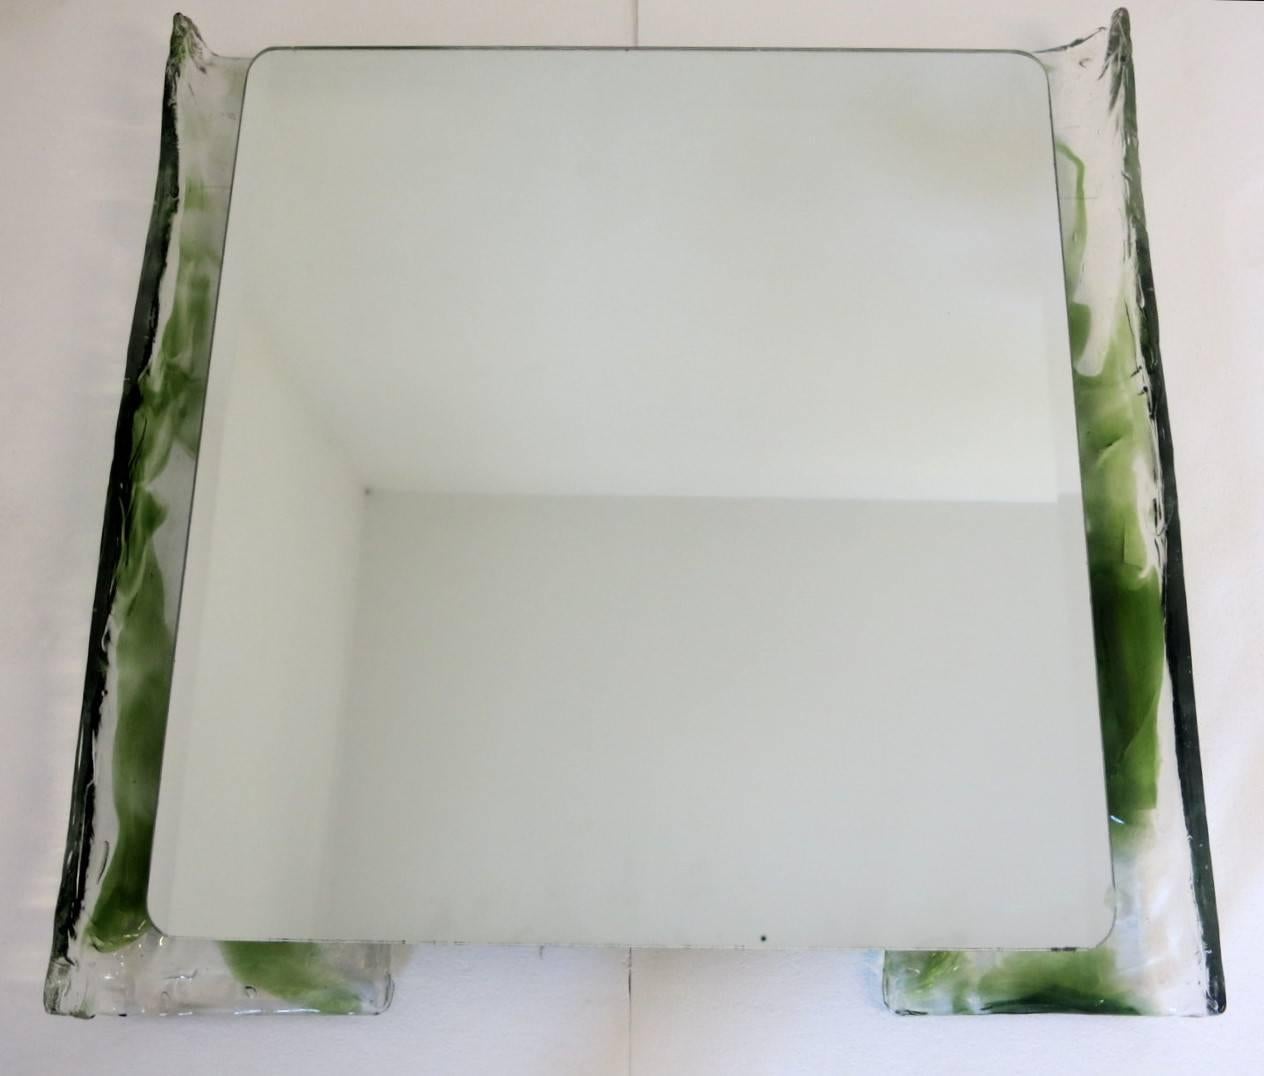 Vintage Italian bathroom set in clear and green Murano glass, includes items below:
1 back lit mirror with 4 lights: Height: 31 inches / Width 31 inches / Depth: 3 inches
1 hand towel holder: Width: 14.5, inches / Height: 4.5 inches / Depth: 3